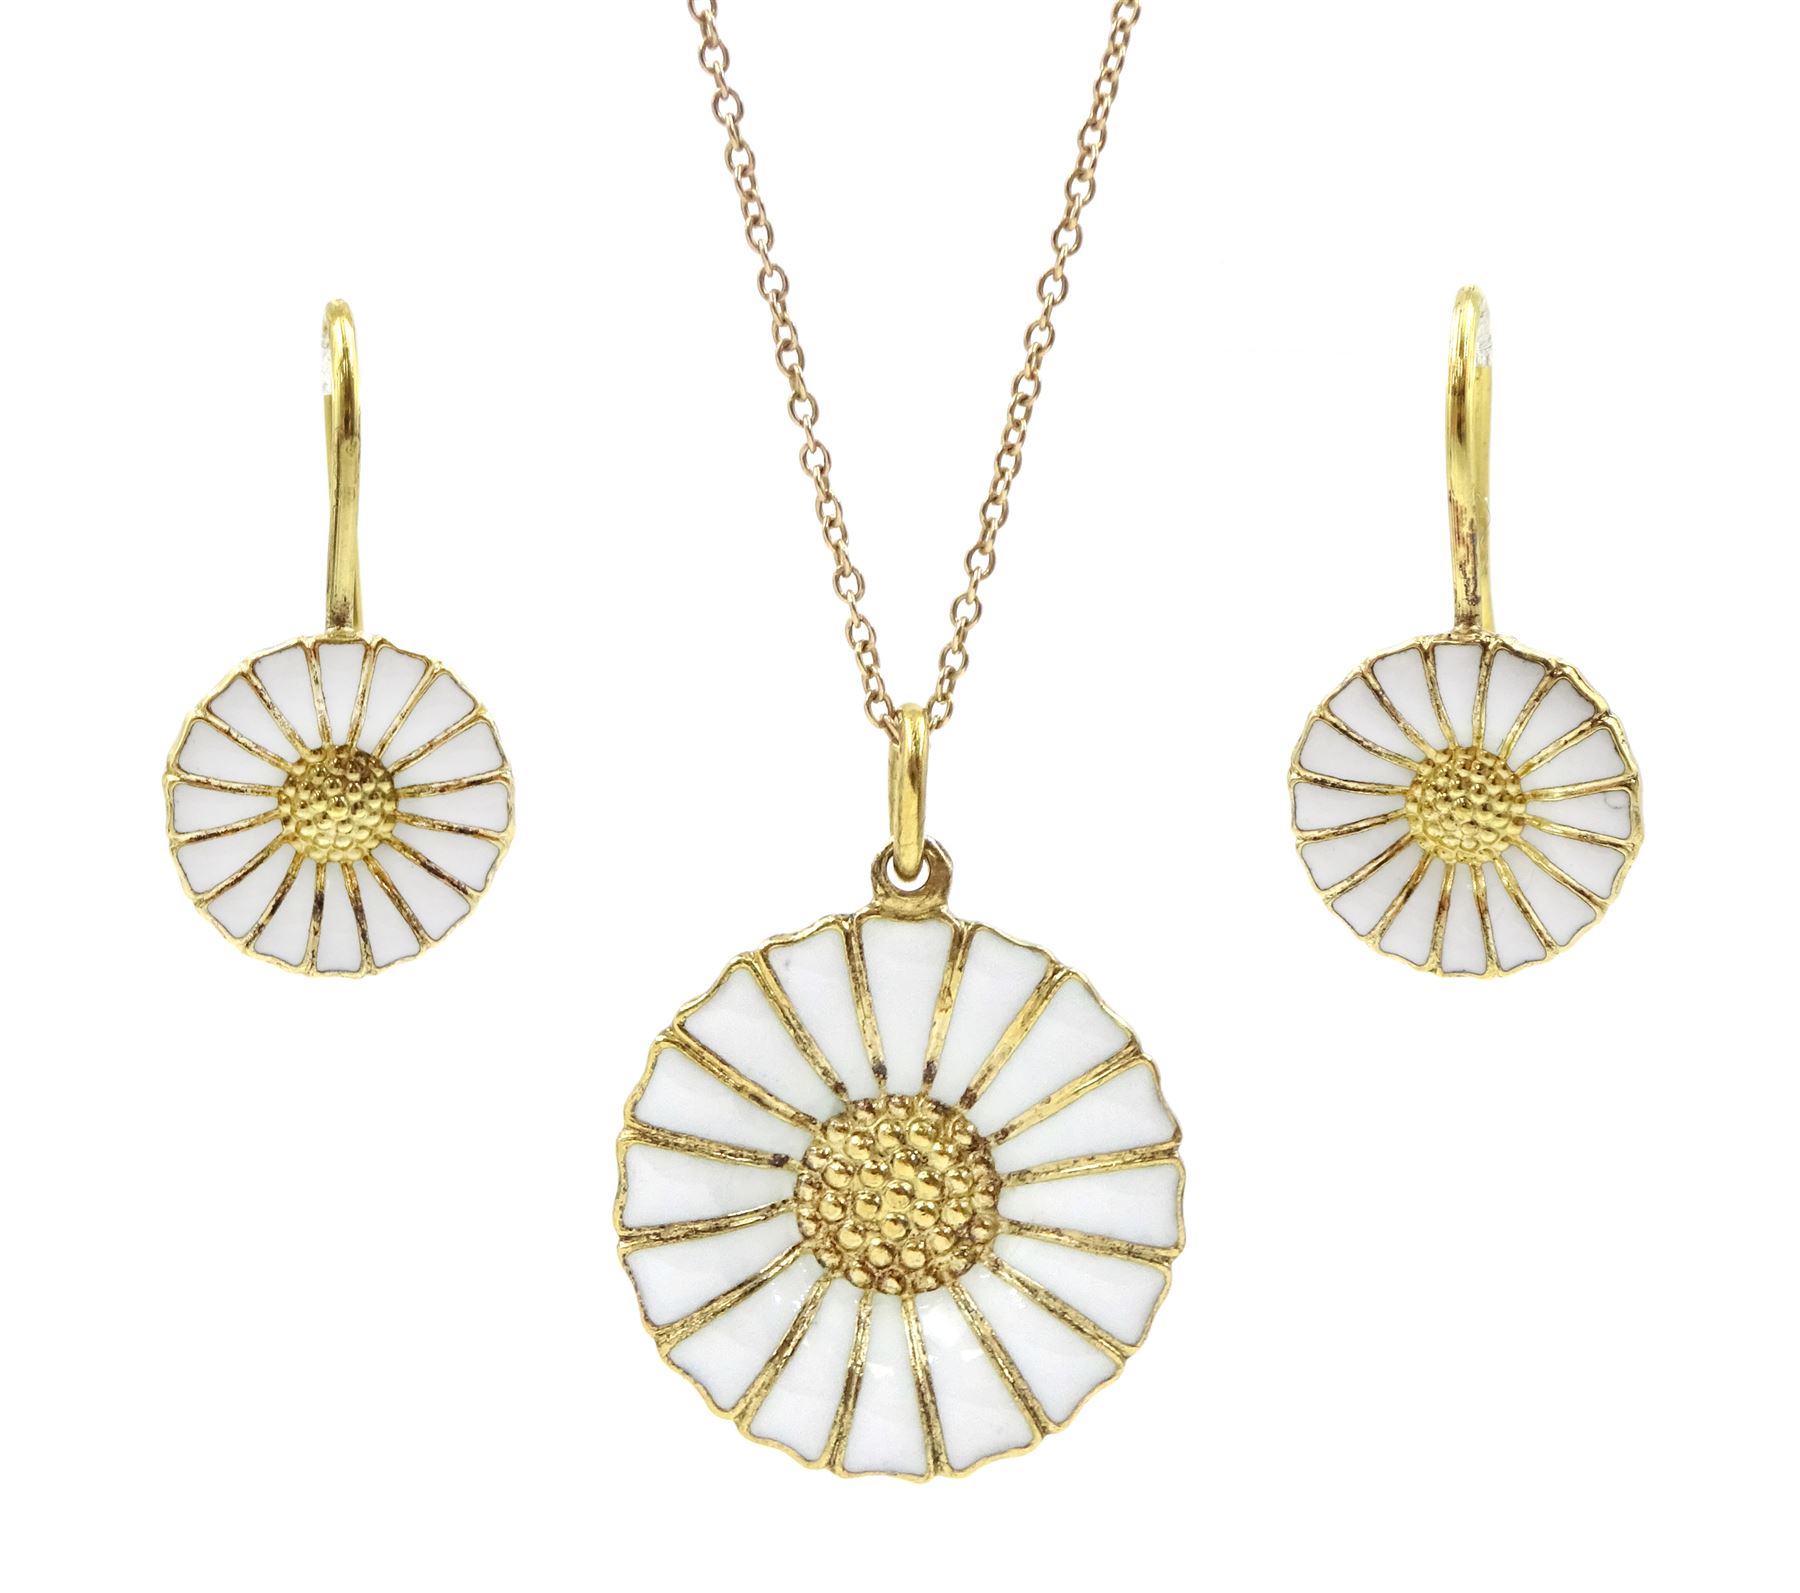 Silver-gilt white enamel daisy pendant necklace and matching pair of pendant earrings by Georg Jense